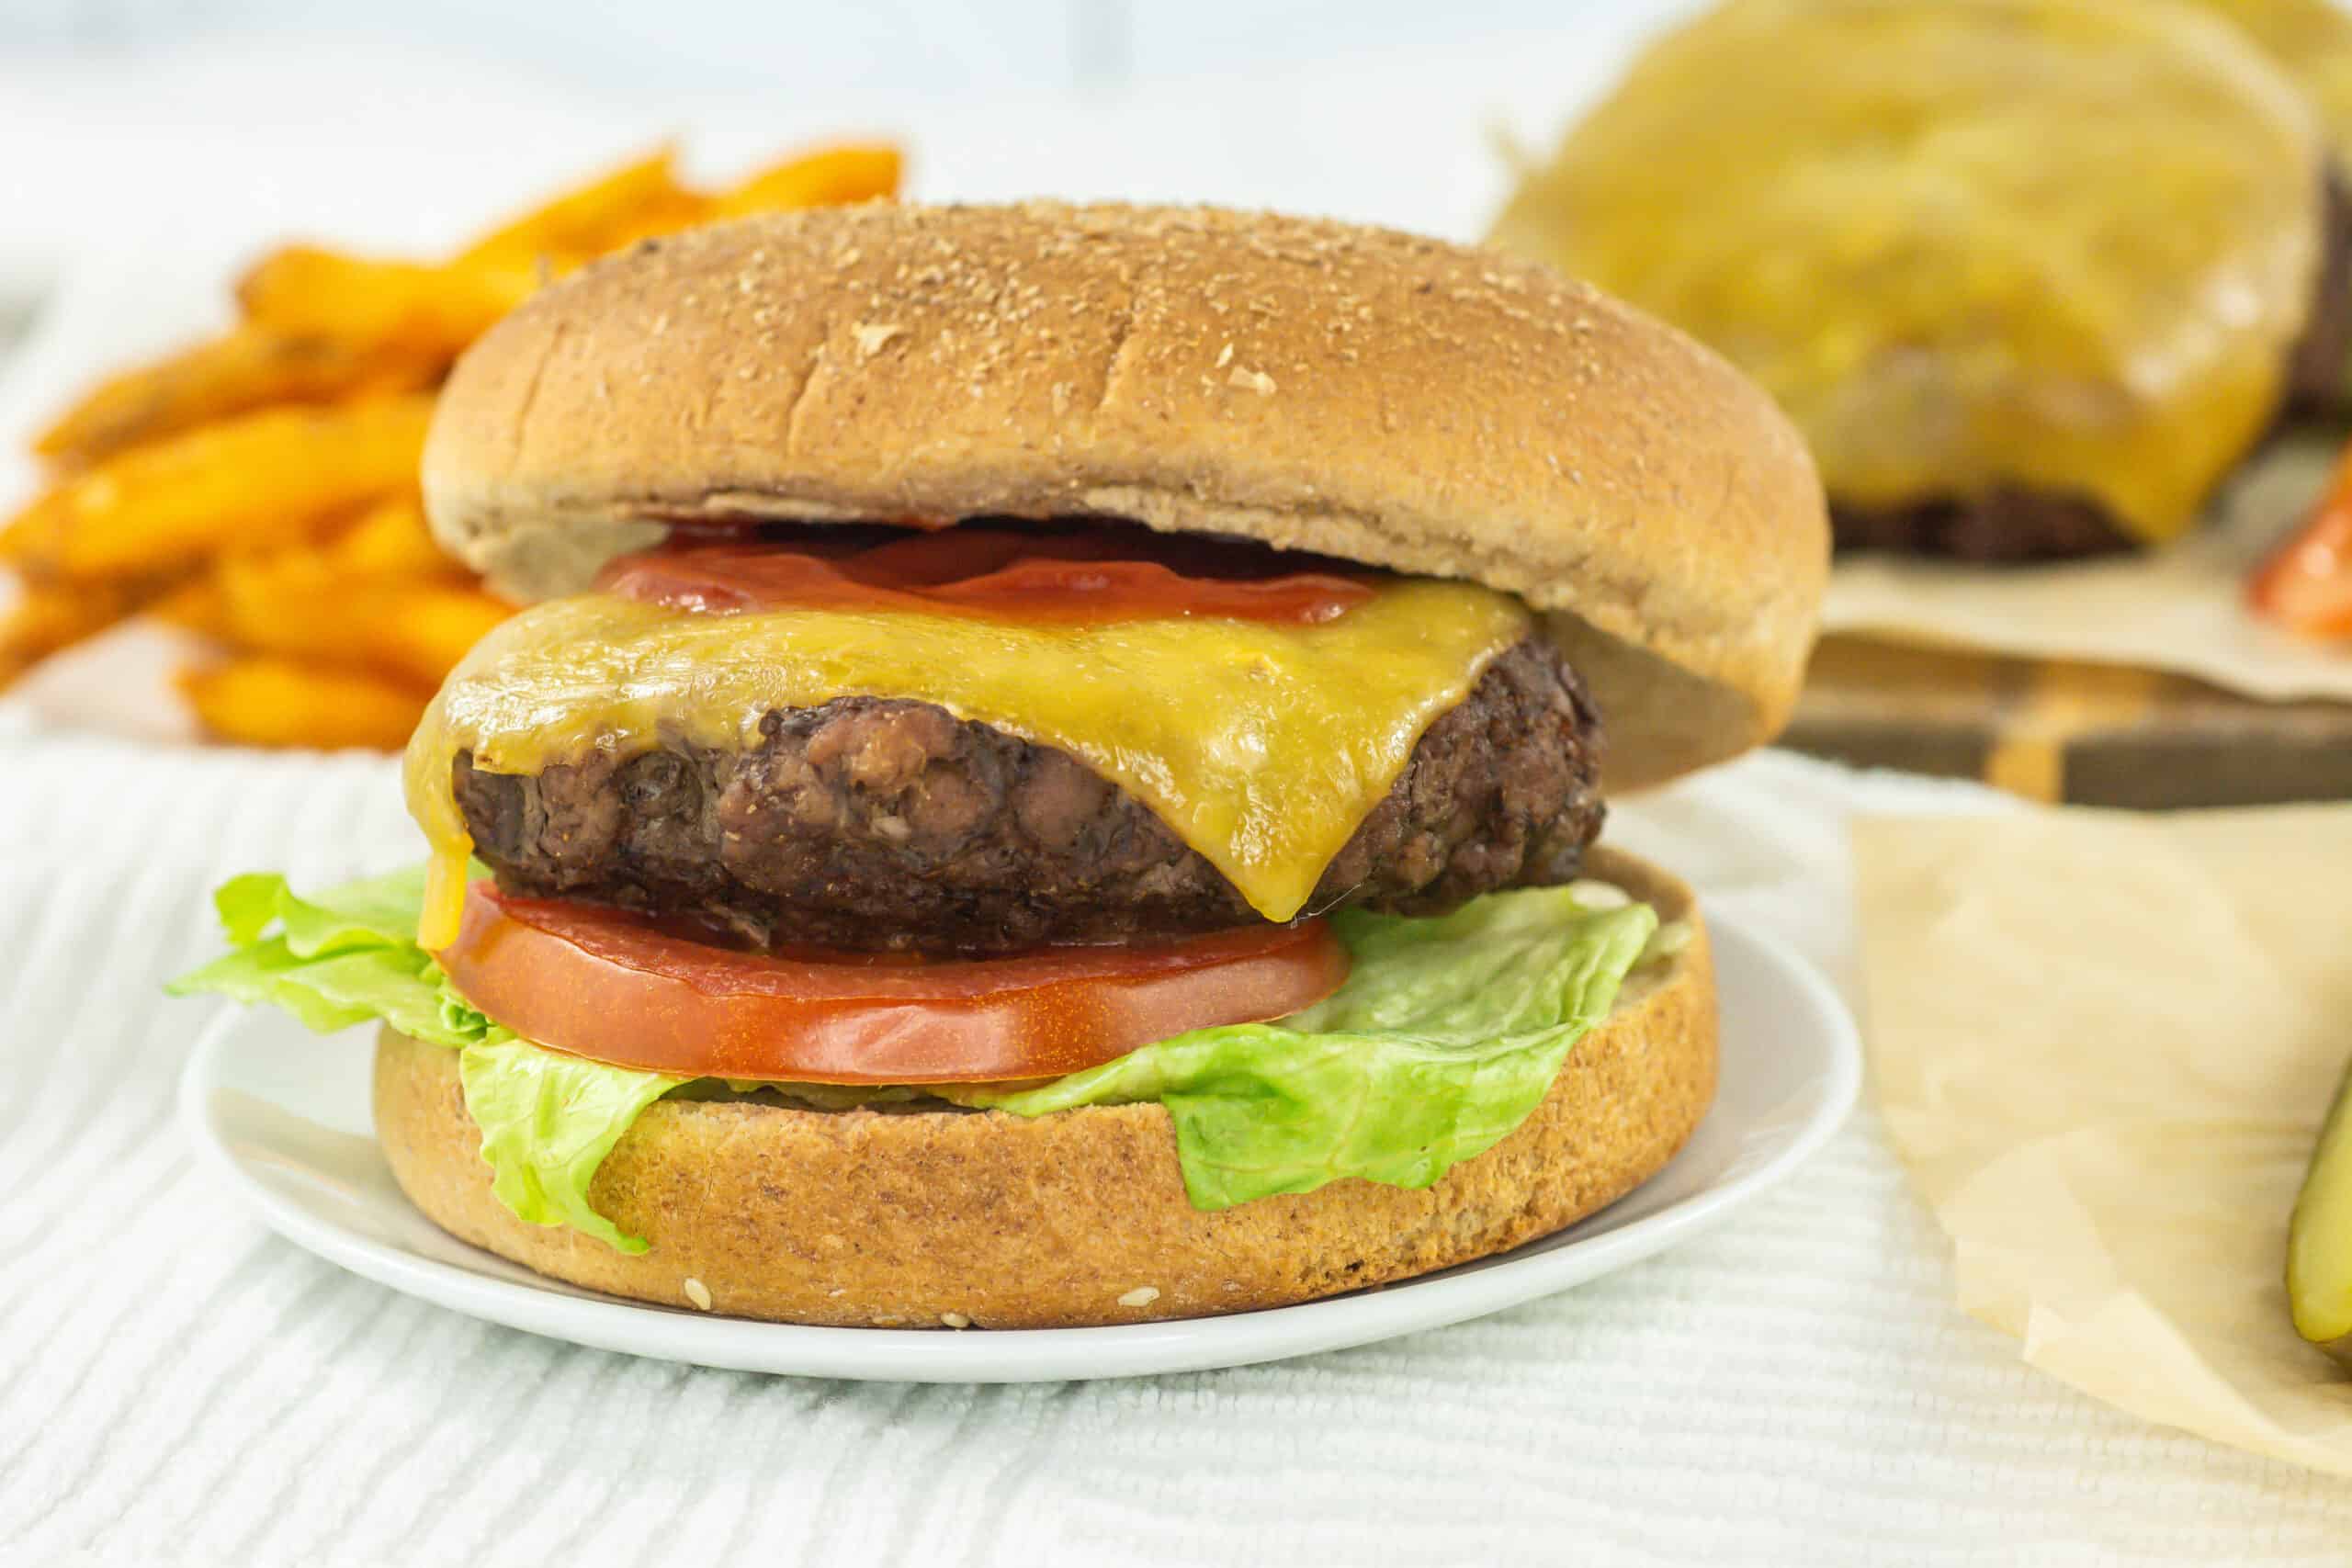 How to Broil Hamburgers: Juicy Broiled Burger Recipe - The Benson Street